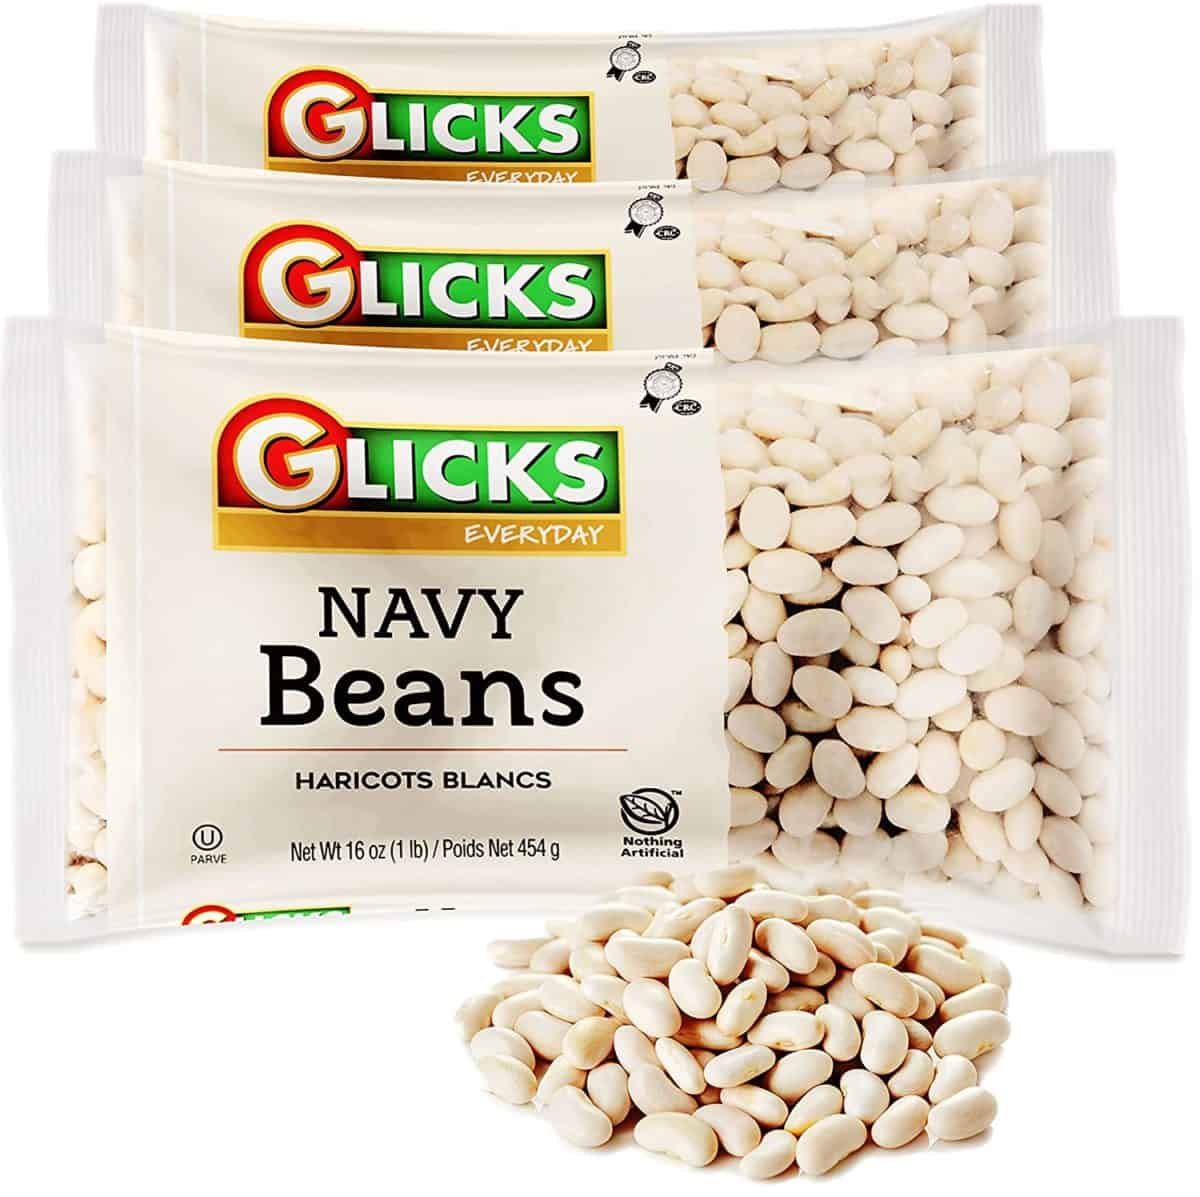 Navy beans as a substitute for black beans